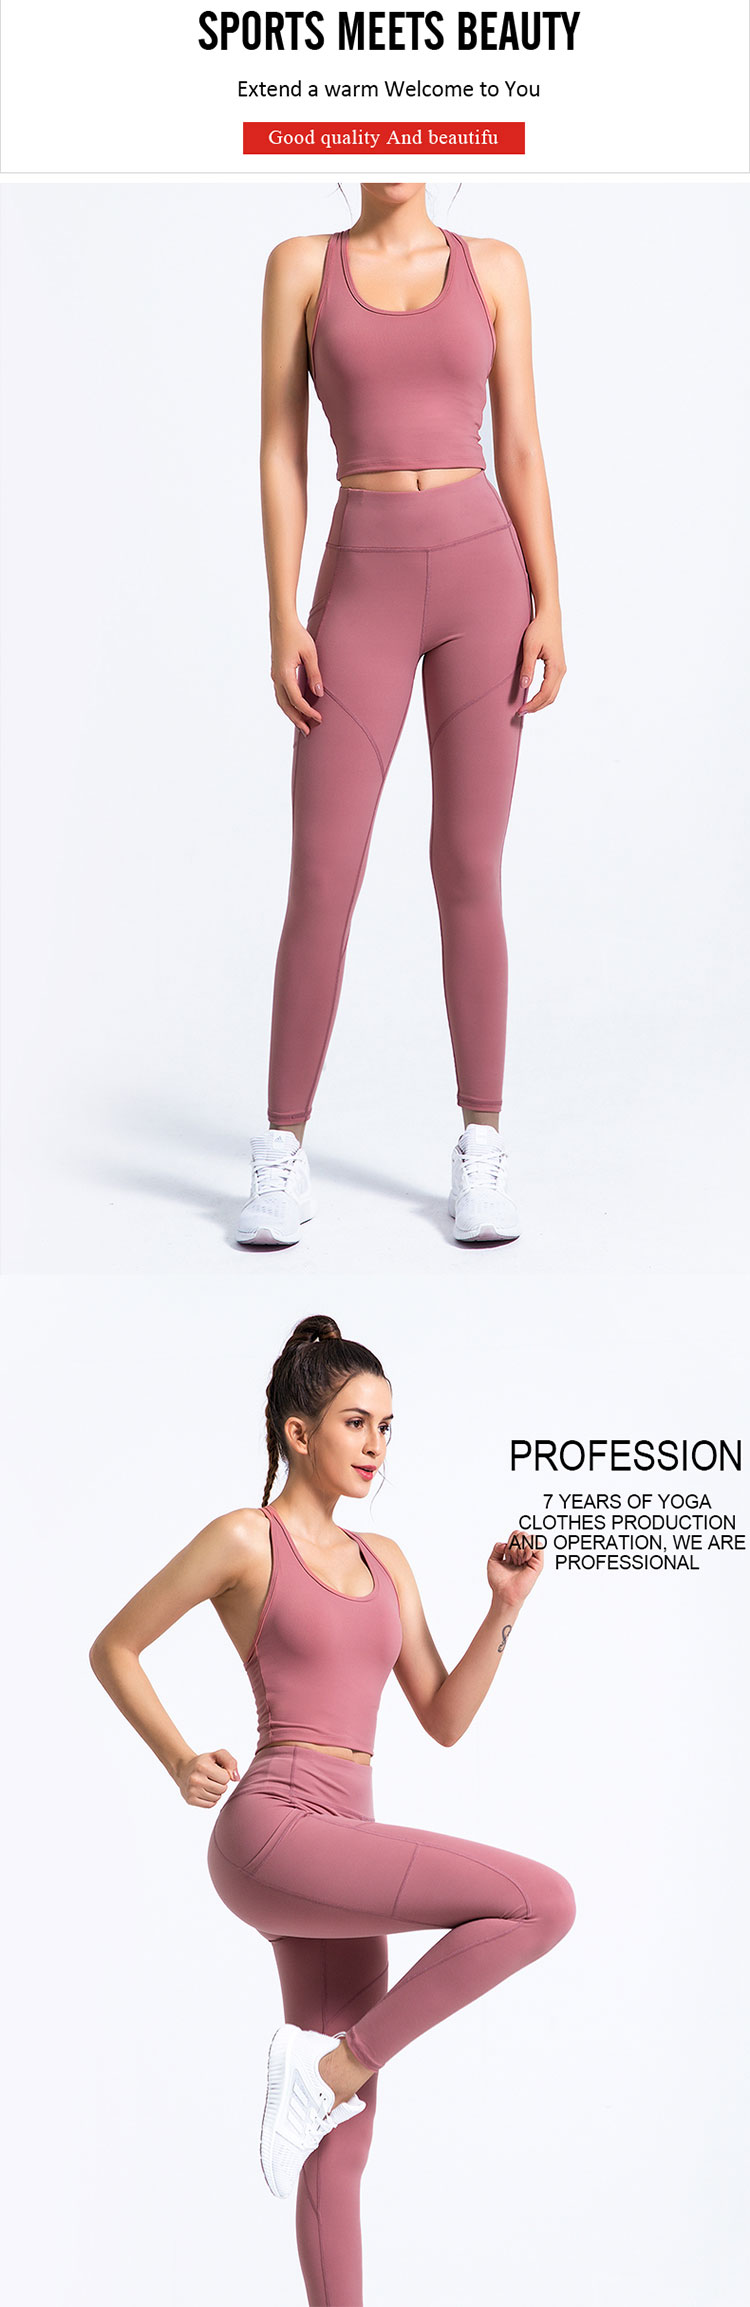 Yoga-pants-gym-is-a-key-overlapping-matching-item